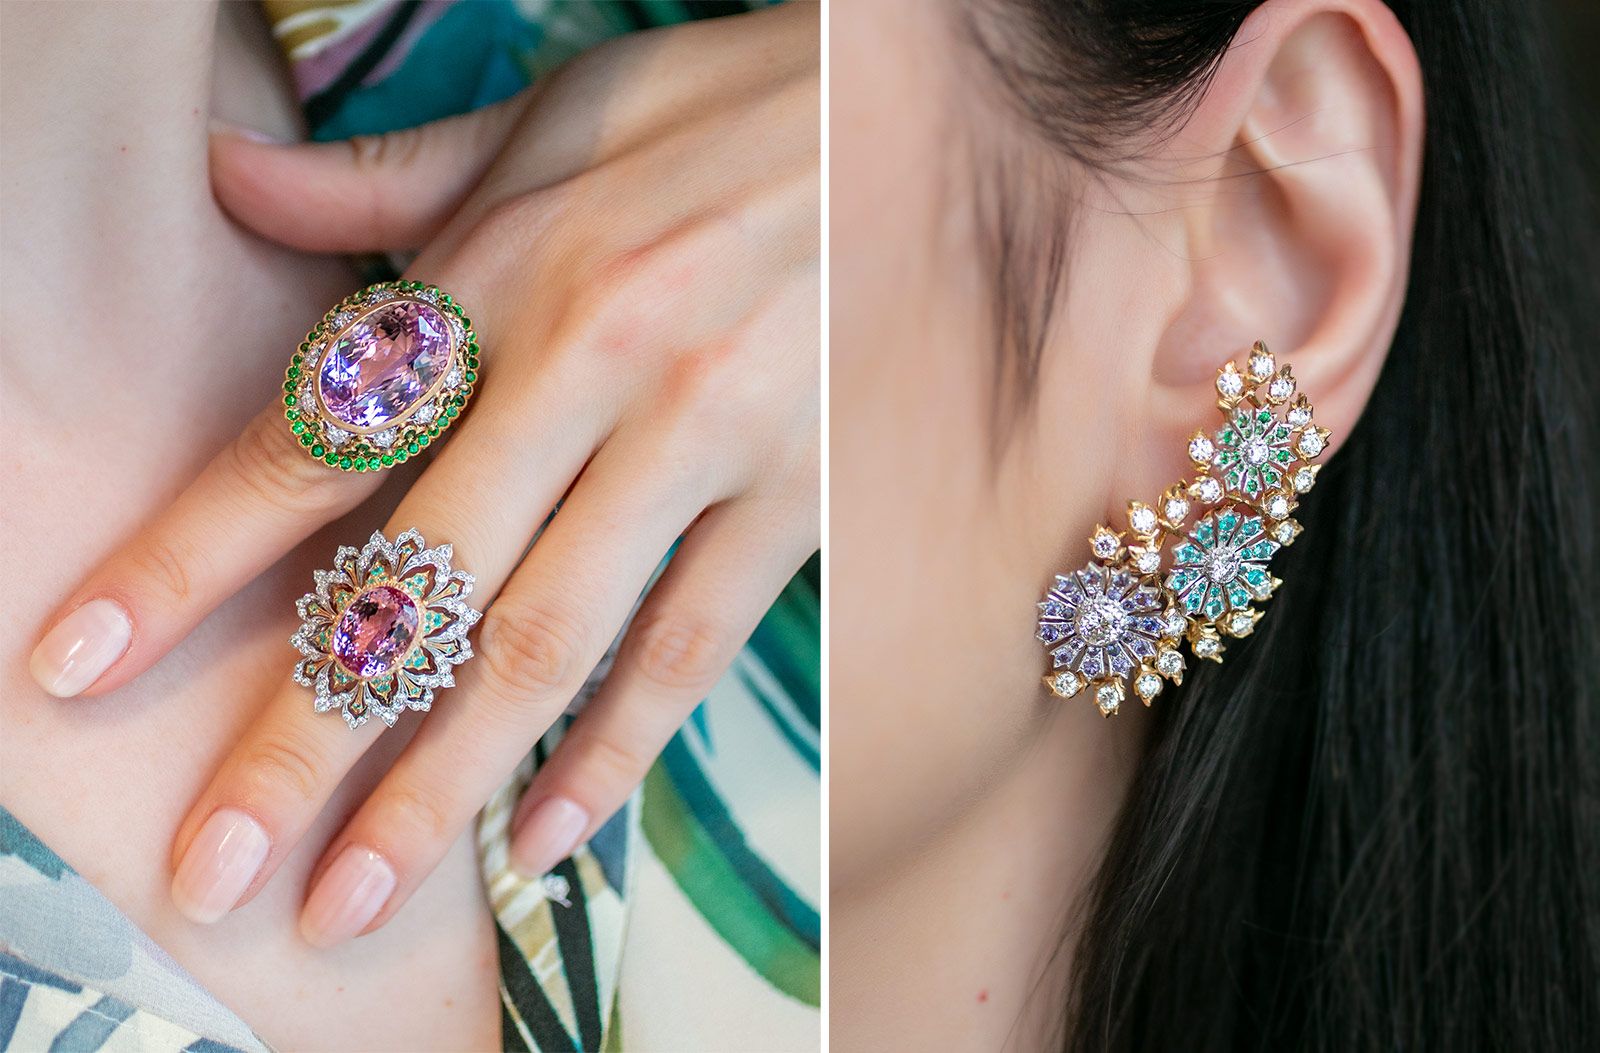 Creations from the Il Giardino di Buccellati High Jewellery collection, including the Bouganville cocktail ring with a 25.85 carat kunzite (top left), the Gelsomino cocktail ring with an 8.60 carat topaz and a gem-set ear climber